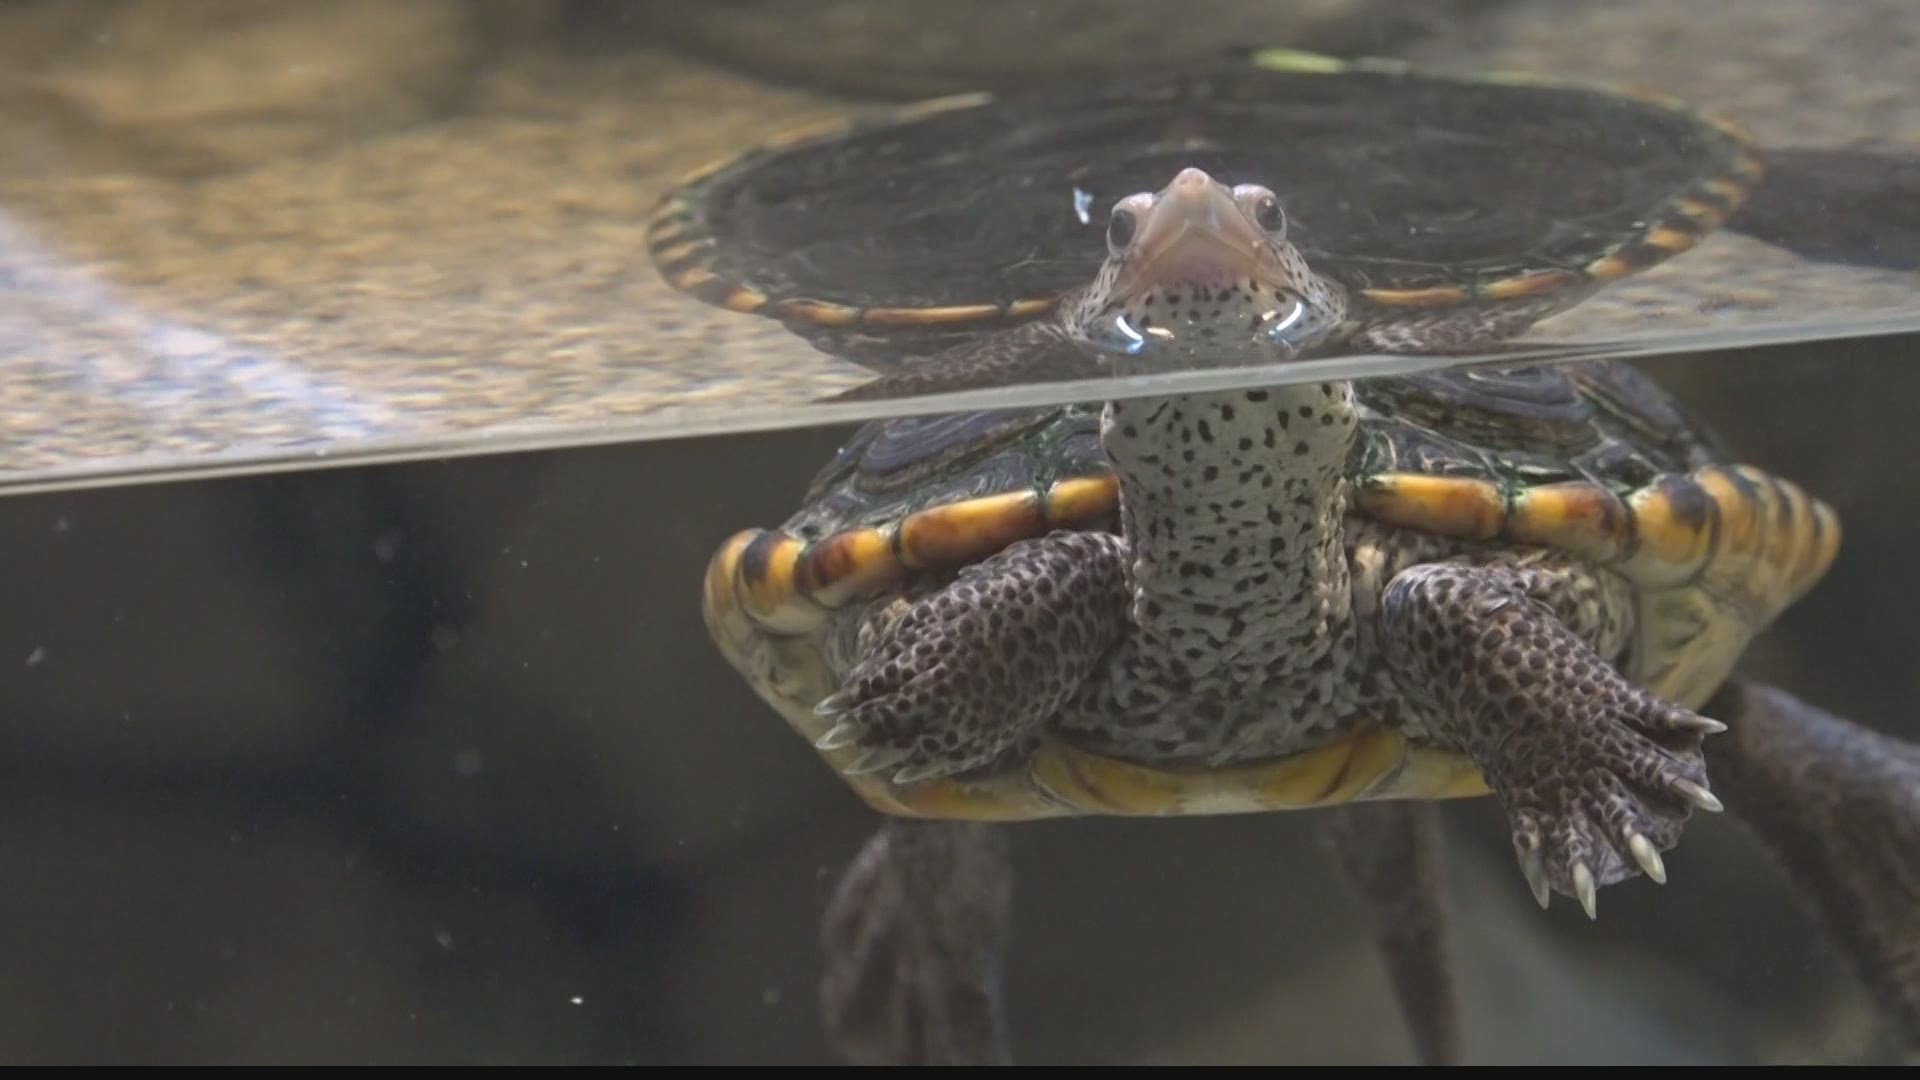 Hundreds of people attended a local museum to celebrate World Turtle Day. They were able to learn more about turtles and the importance of protecting their habitats.